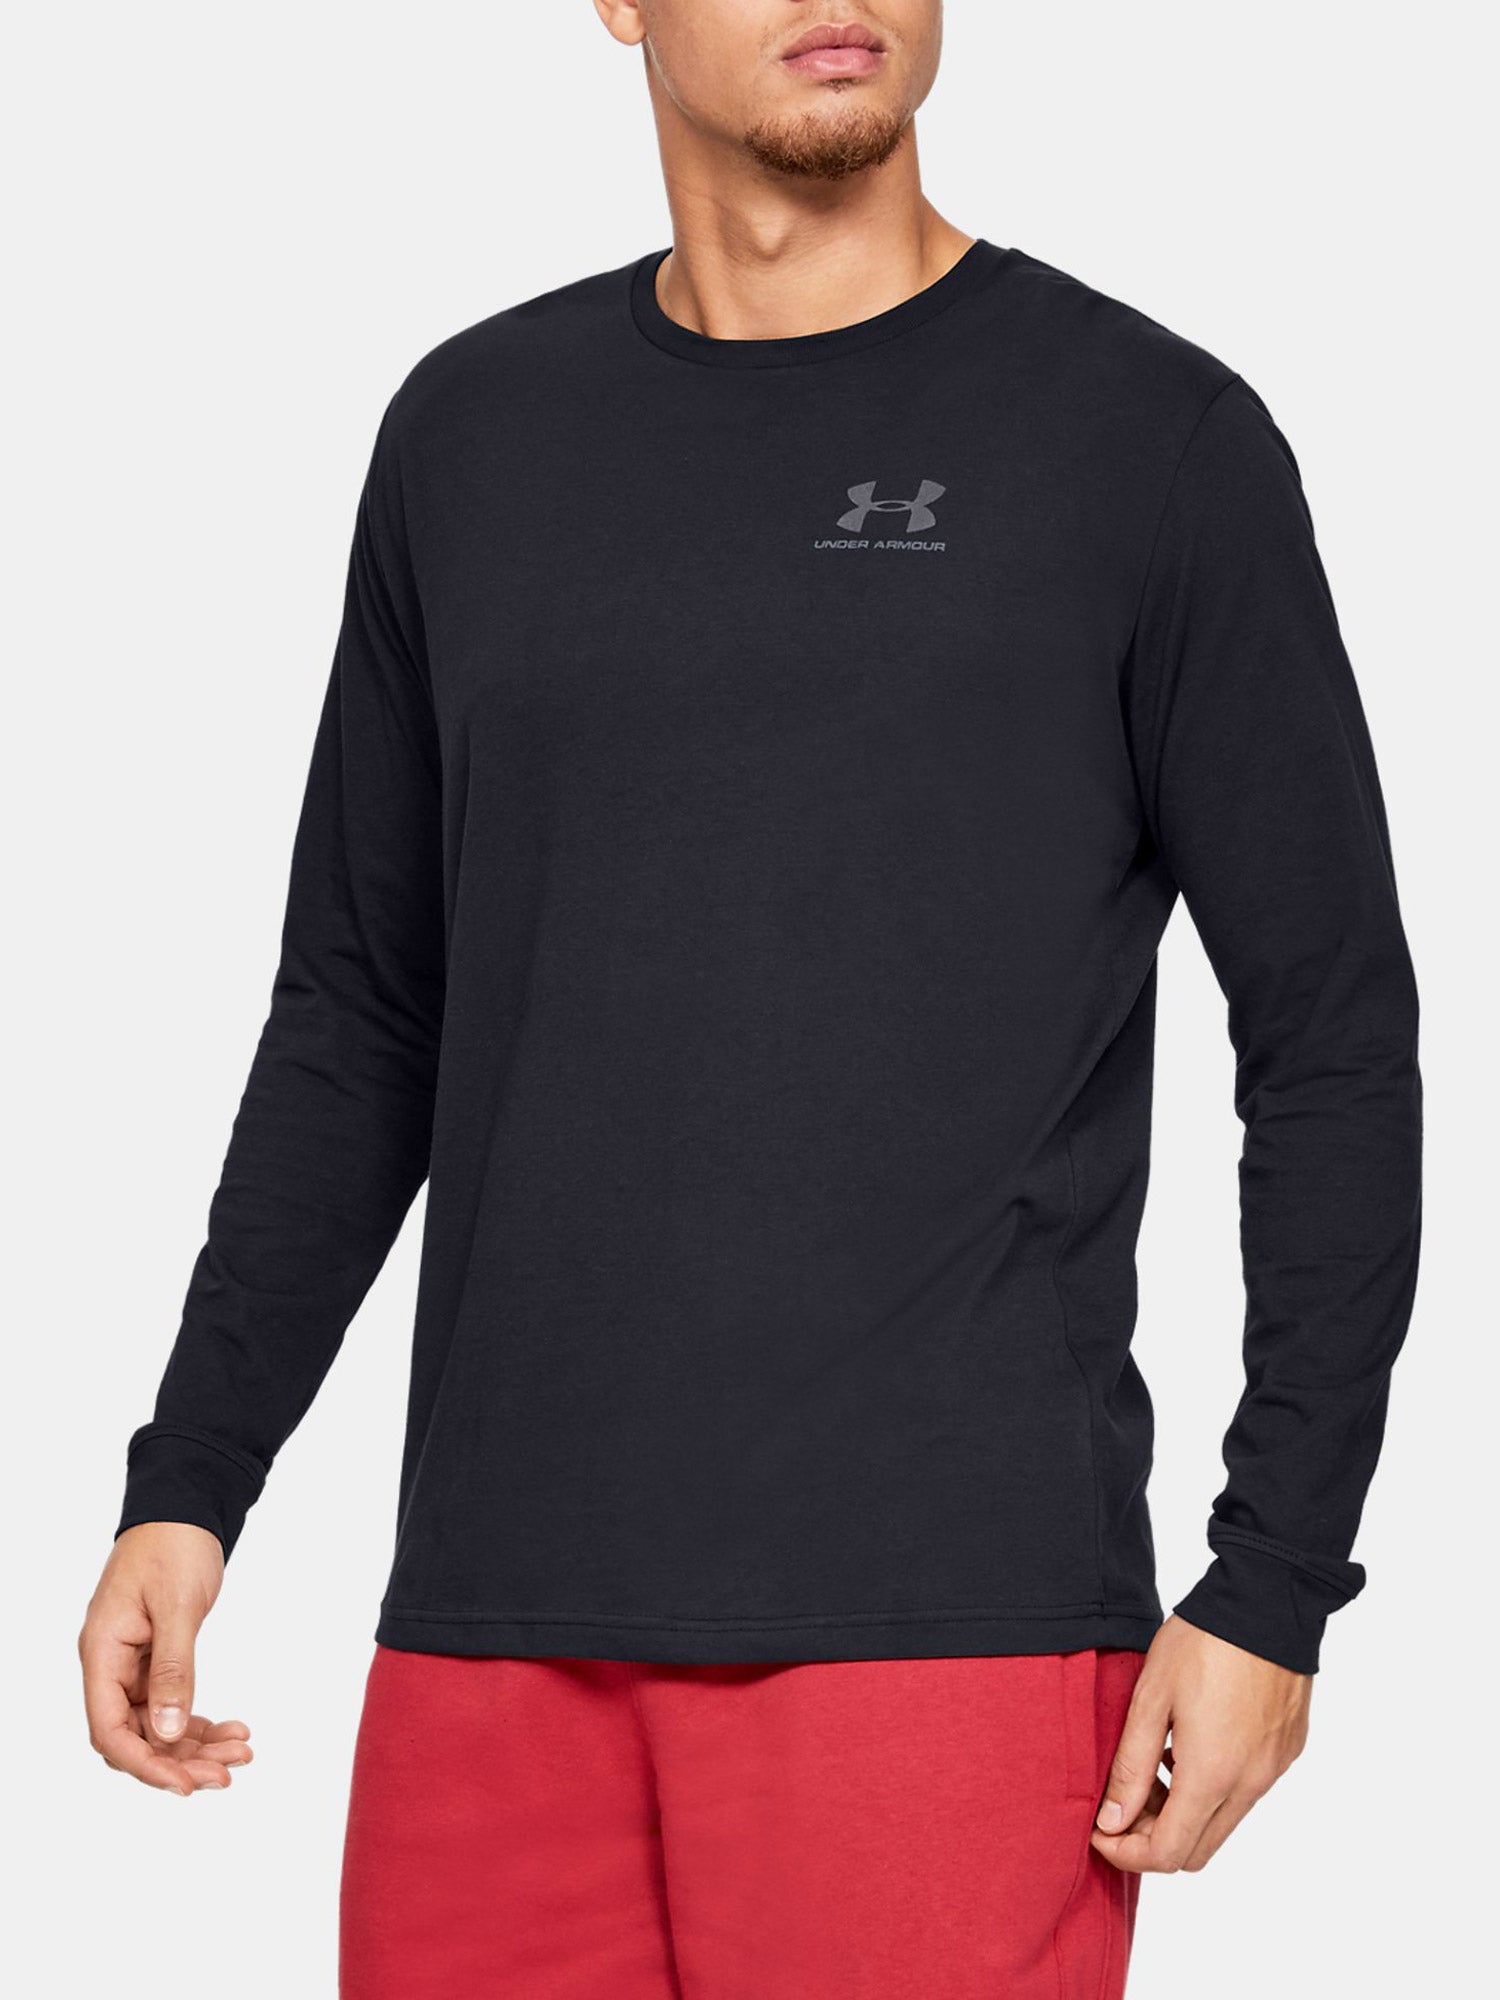 Under Armour 1329585 UA Sportstyle Left Chest Long Sleeve T-Shirt Black Front Model View